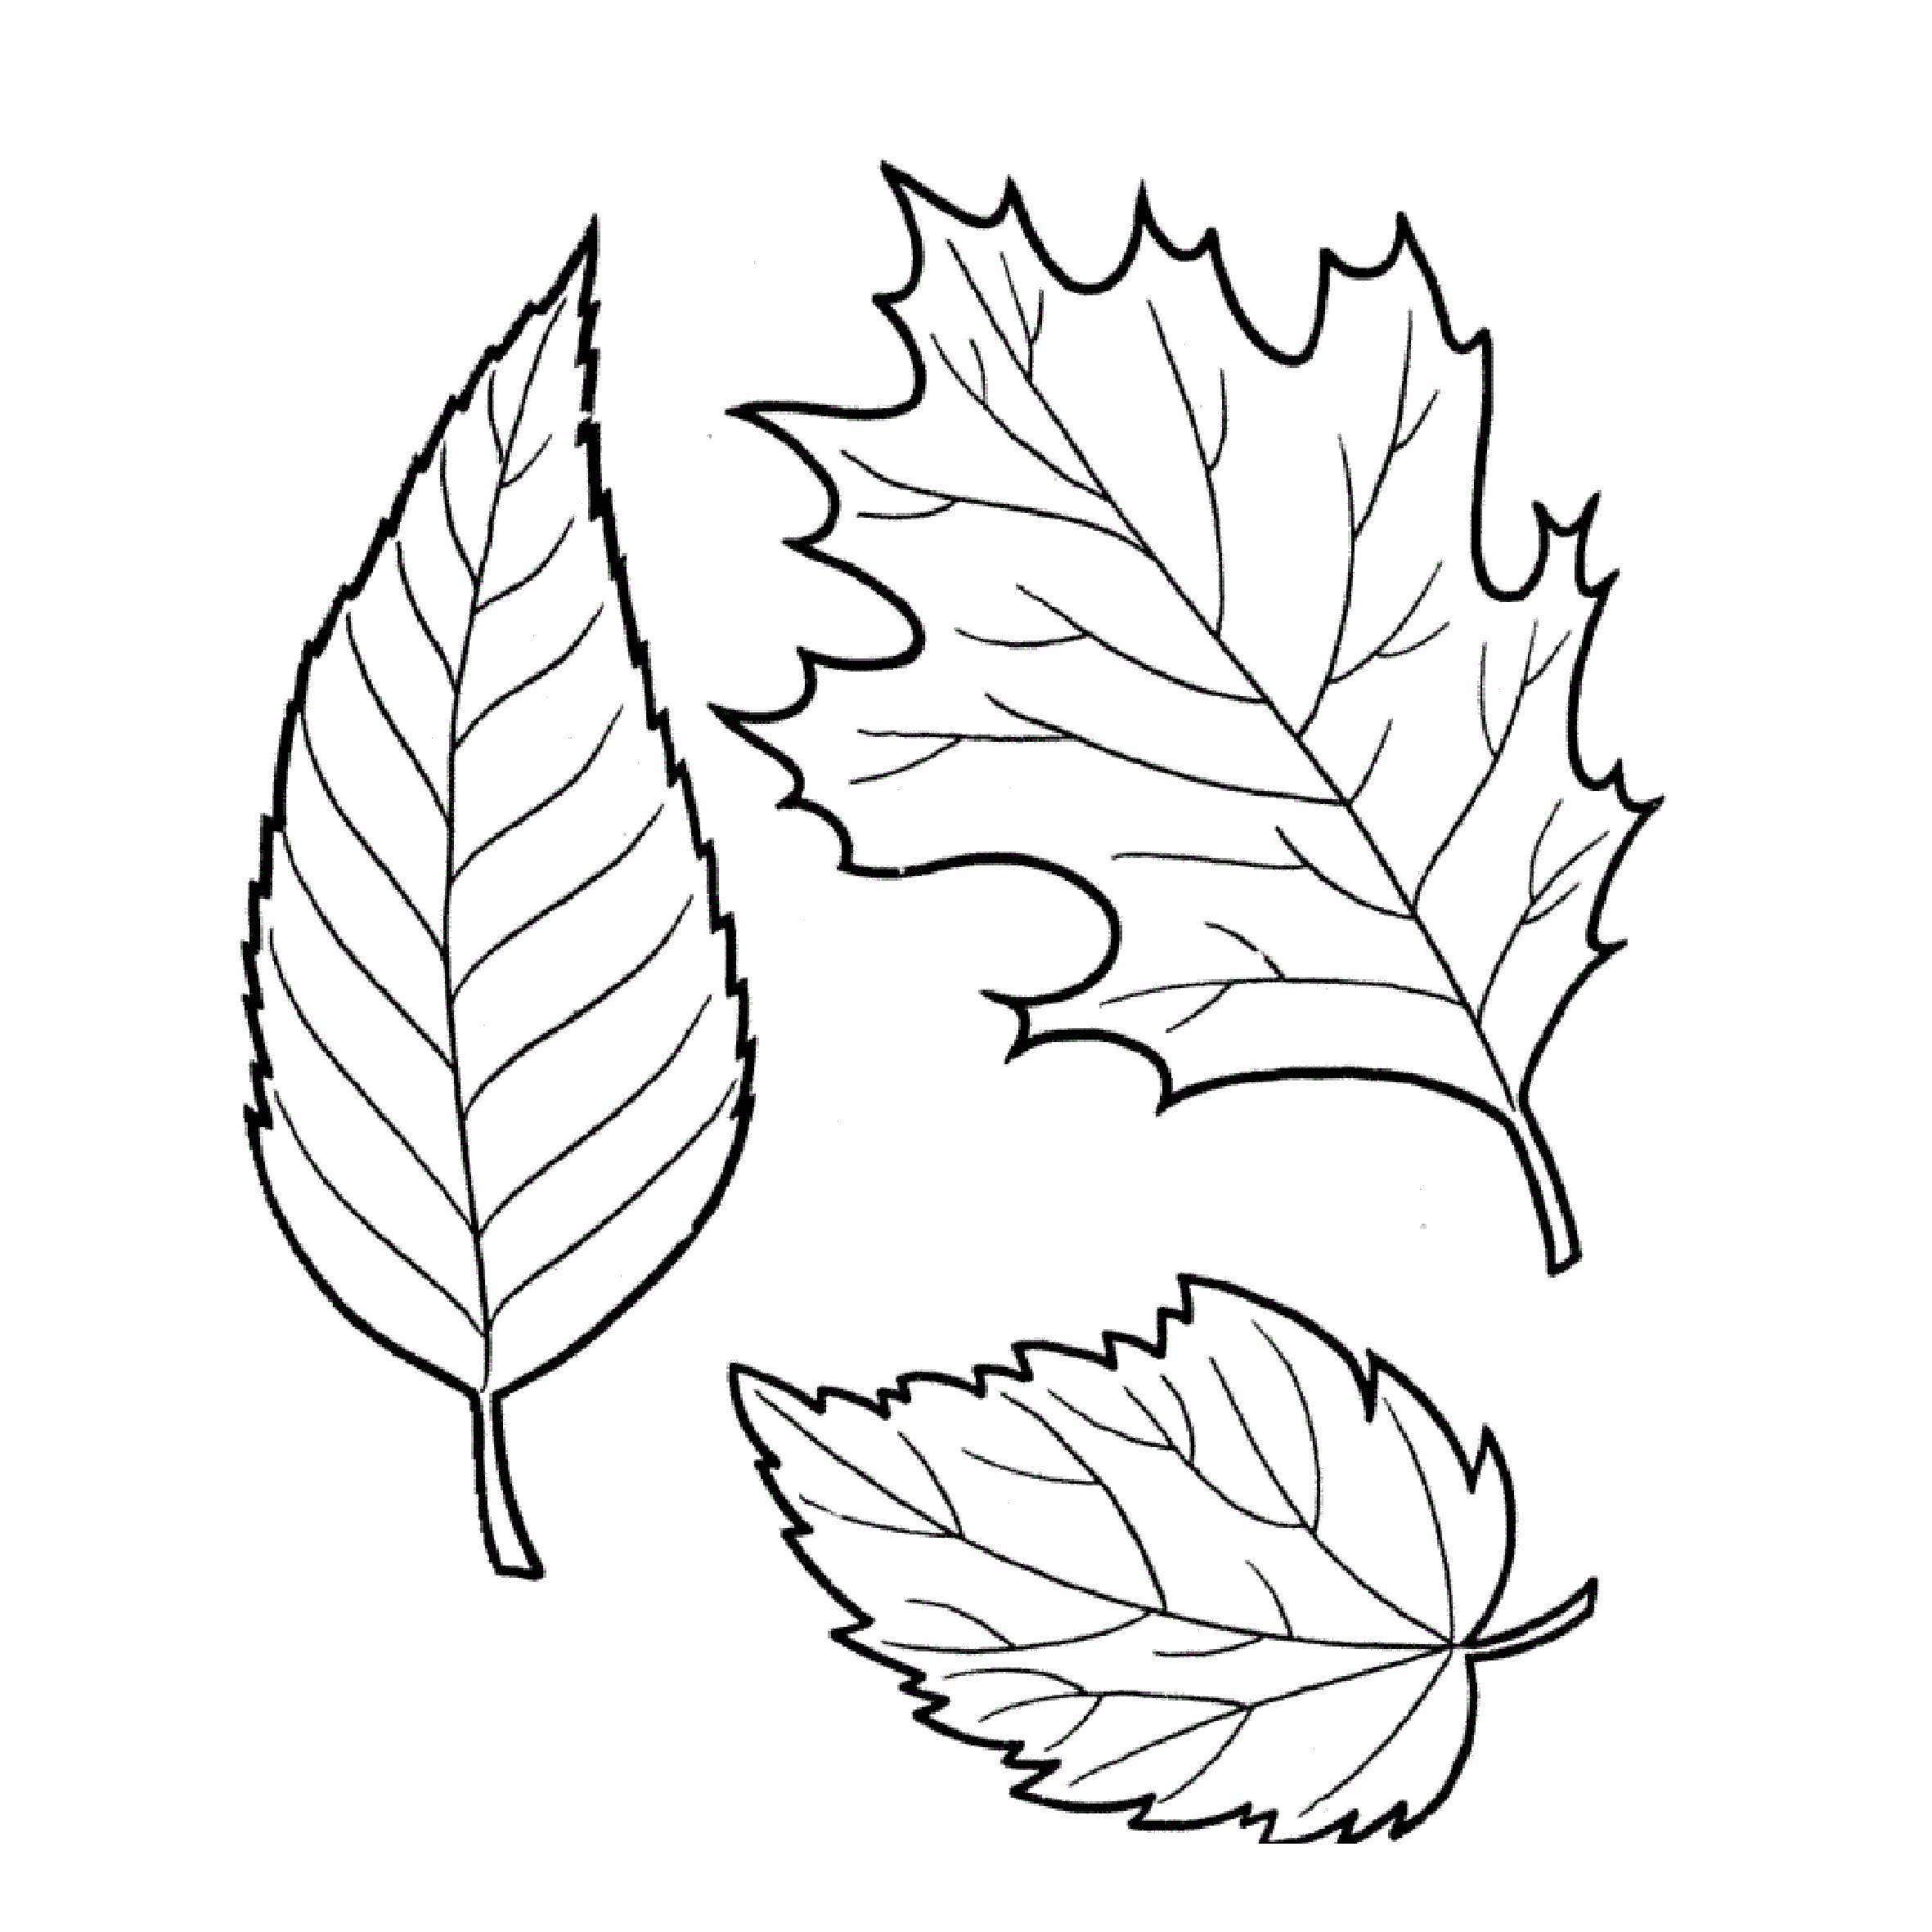 Coloring Leaves from various trees. Category leaves. Tags:  Leaves, tree.